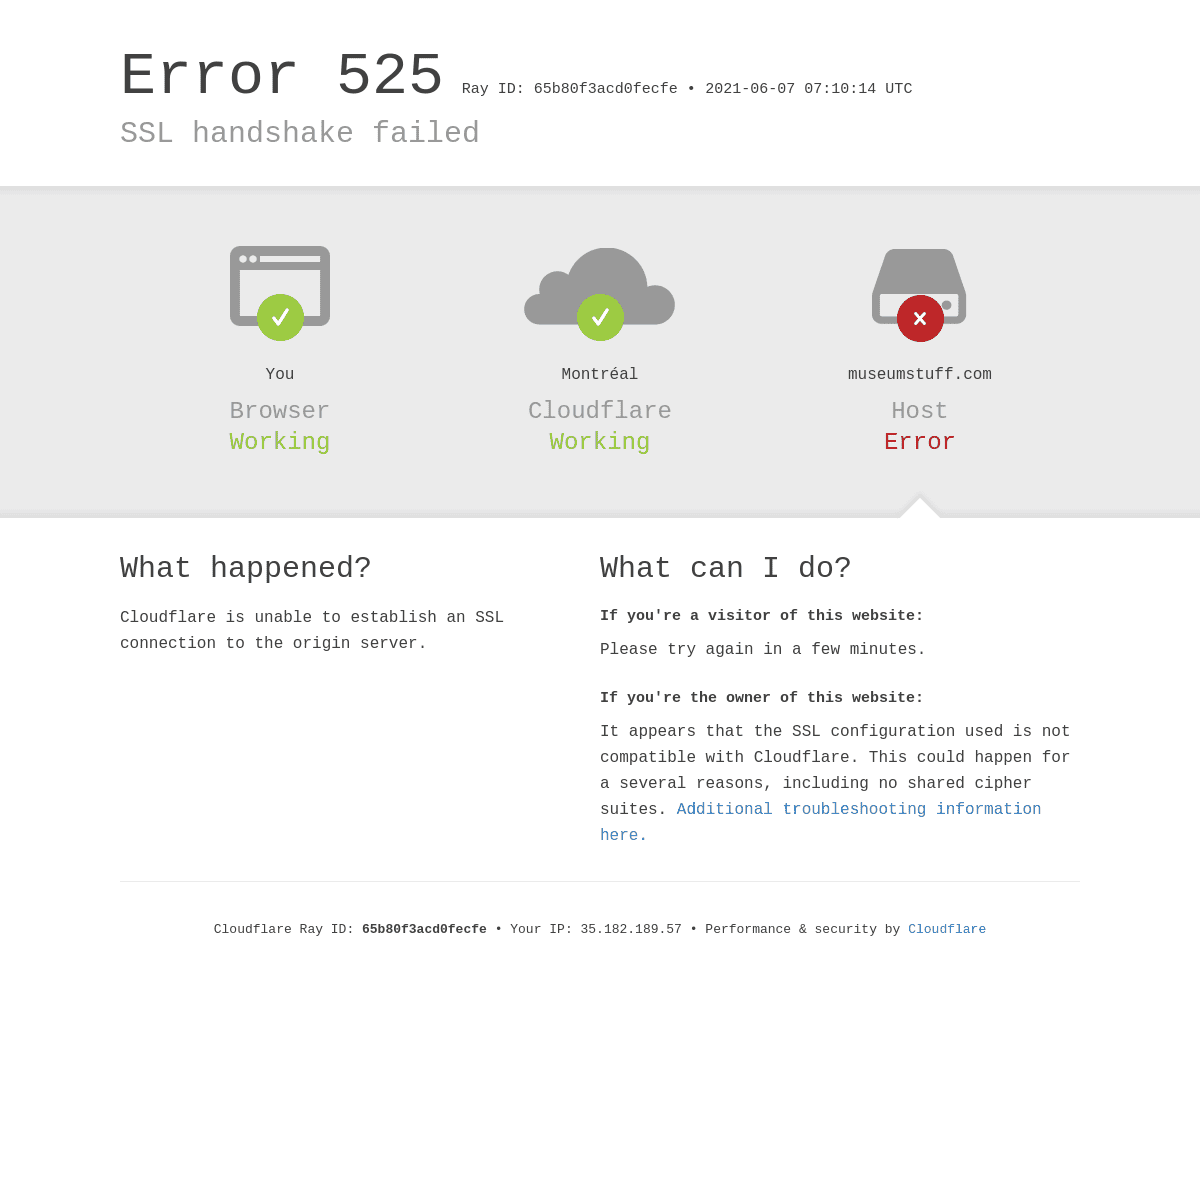 A complete backup of https://museumstuff.com